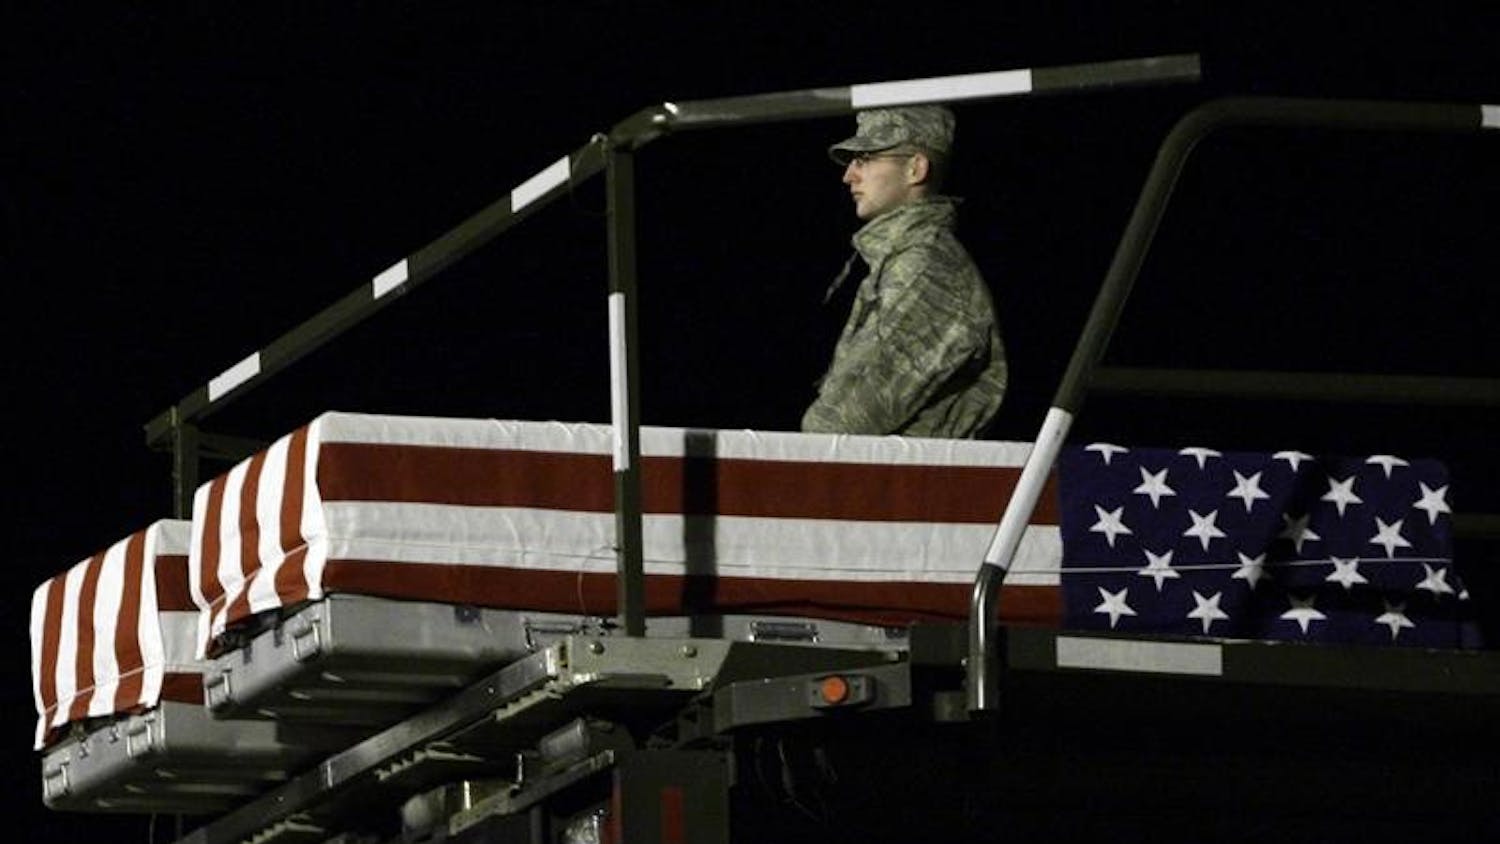 A member of a carry team at Dover Air Force Base, Del., stands with the transfer case containing the remains of Private Second Class Bryce E. Gautier, 22, of Cypress, Calif. and Cpl. Jason G. Pautsch, 20, of Davenport, Iowa, as they are lowered to the tarmac on Sunday.  Gautier, and Pautsch died with three other soldiers April 10, 2009, when their military vehicle was struck by a suicide vehicle-borne improvised explosive device in Mosul, Iraq.  